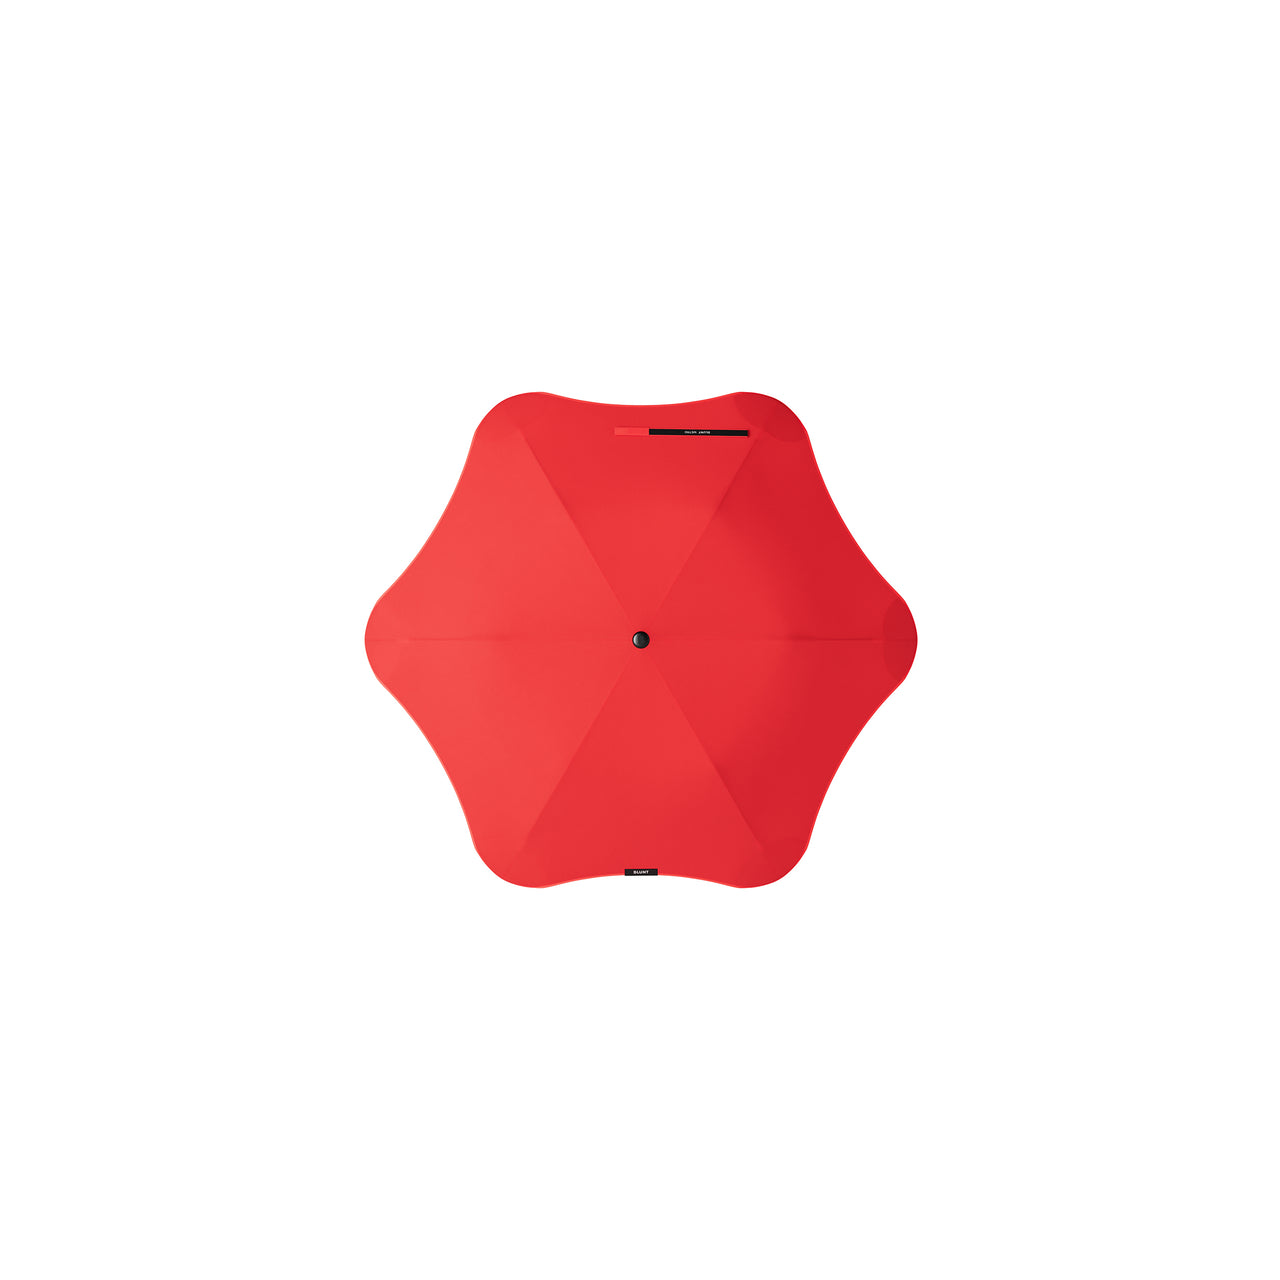 BLUNT Metro Collapsible Compact Umbrella RED